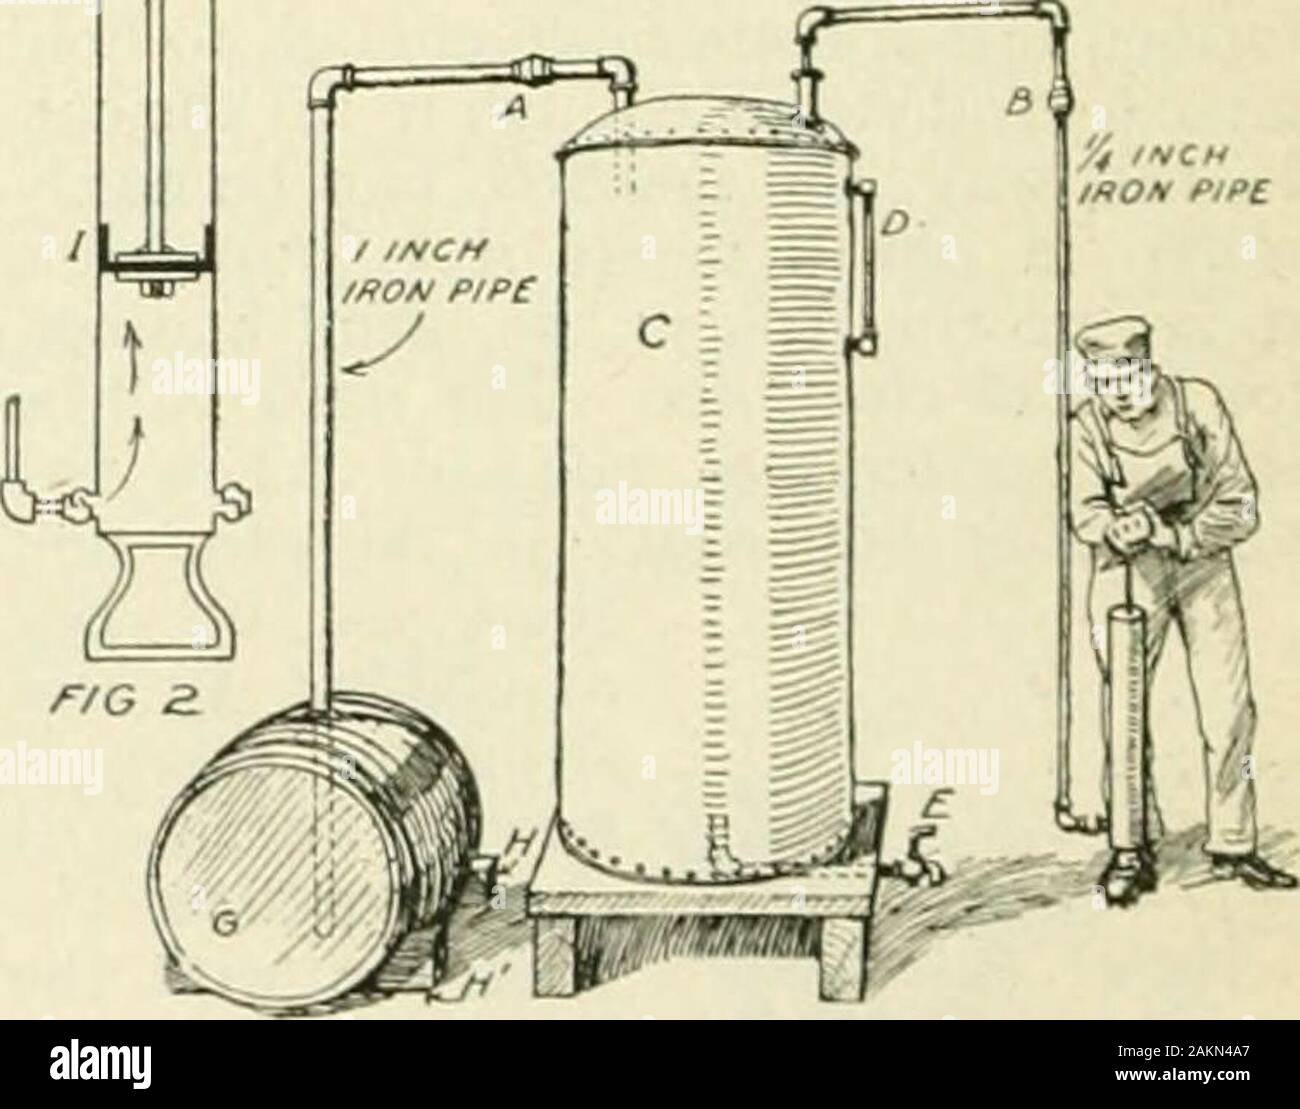 Popular science monthly . ncil, whilethe other end lies flat in a lengthwiseposition. aig=aViElit-ill—I Building an Oil Reservoir ASIMPLL and useful outfit for thestf)rage of oil or other liciuids isshown in the illustration. A one-hun-dred-gallon range-boiler is shown at C;I /4-inch air-pipe is connected to thesimple pump shown and to the top of thetank (the unions A and B are of theground-faced kind so that the pipes canbe disconnected and laid aside when notin use). The oil barrel 6 is rolled intoplace and blocked with pieces H and //,the bung removed and the one-inch pipeconnected as shown Stock Photo